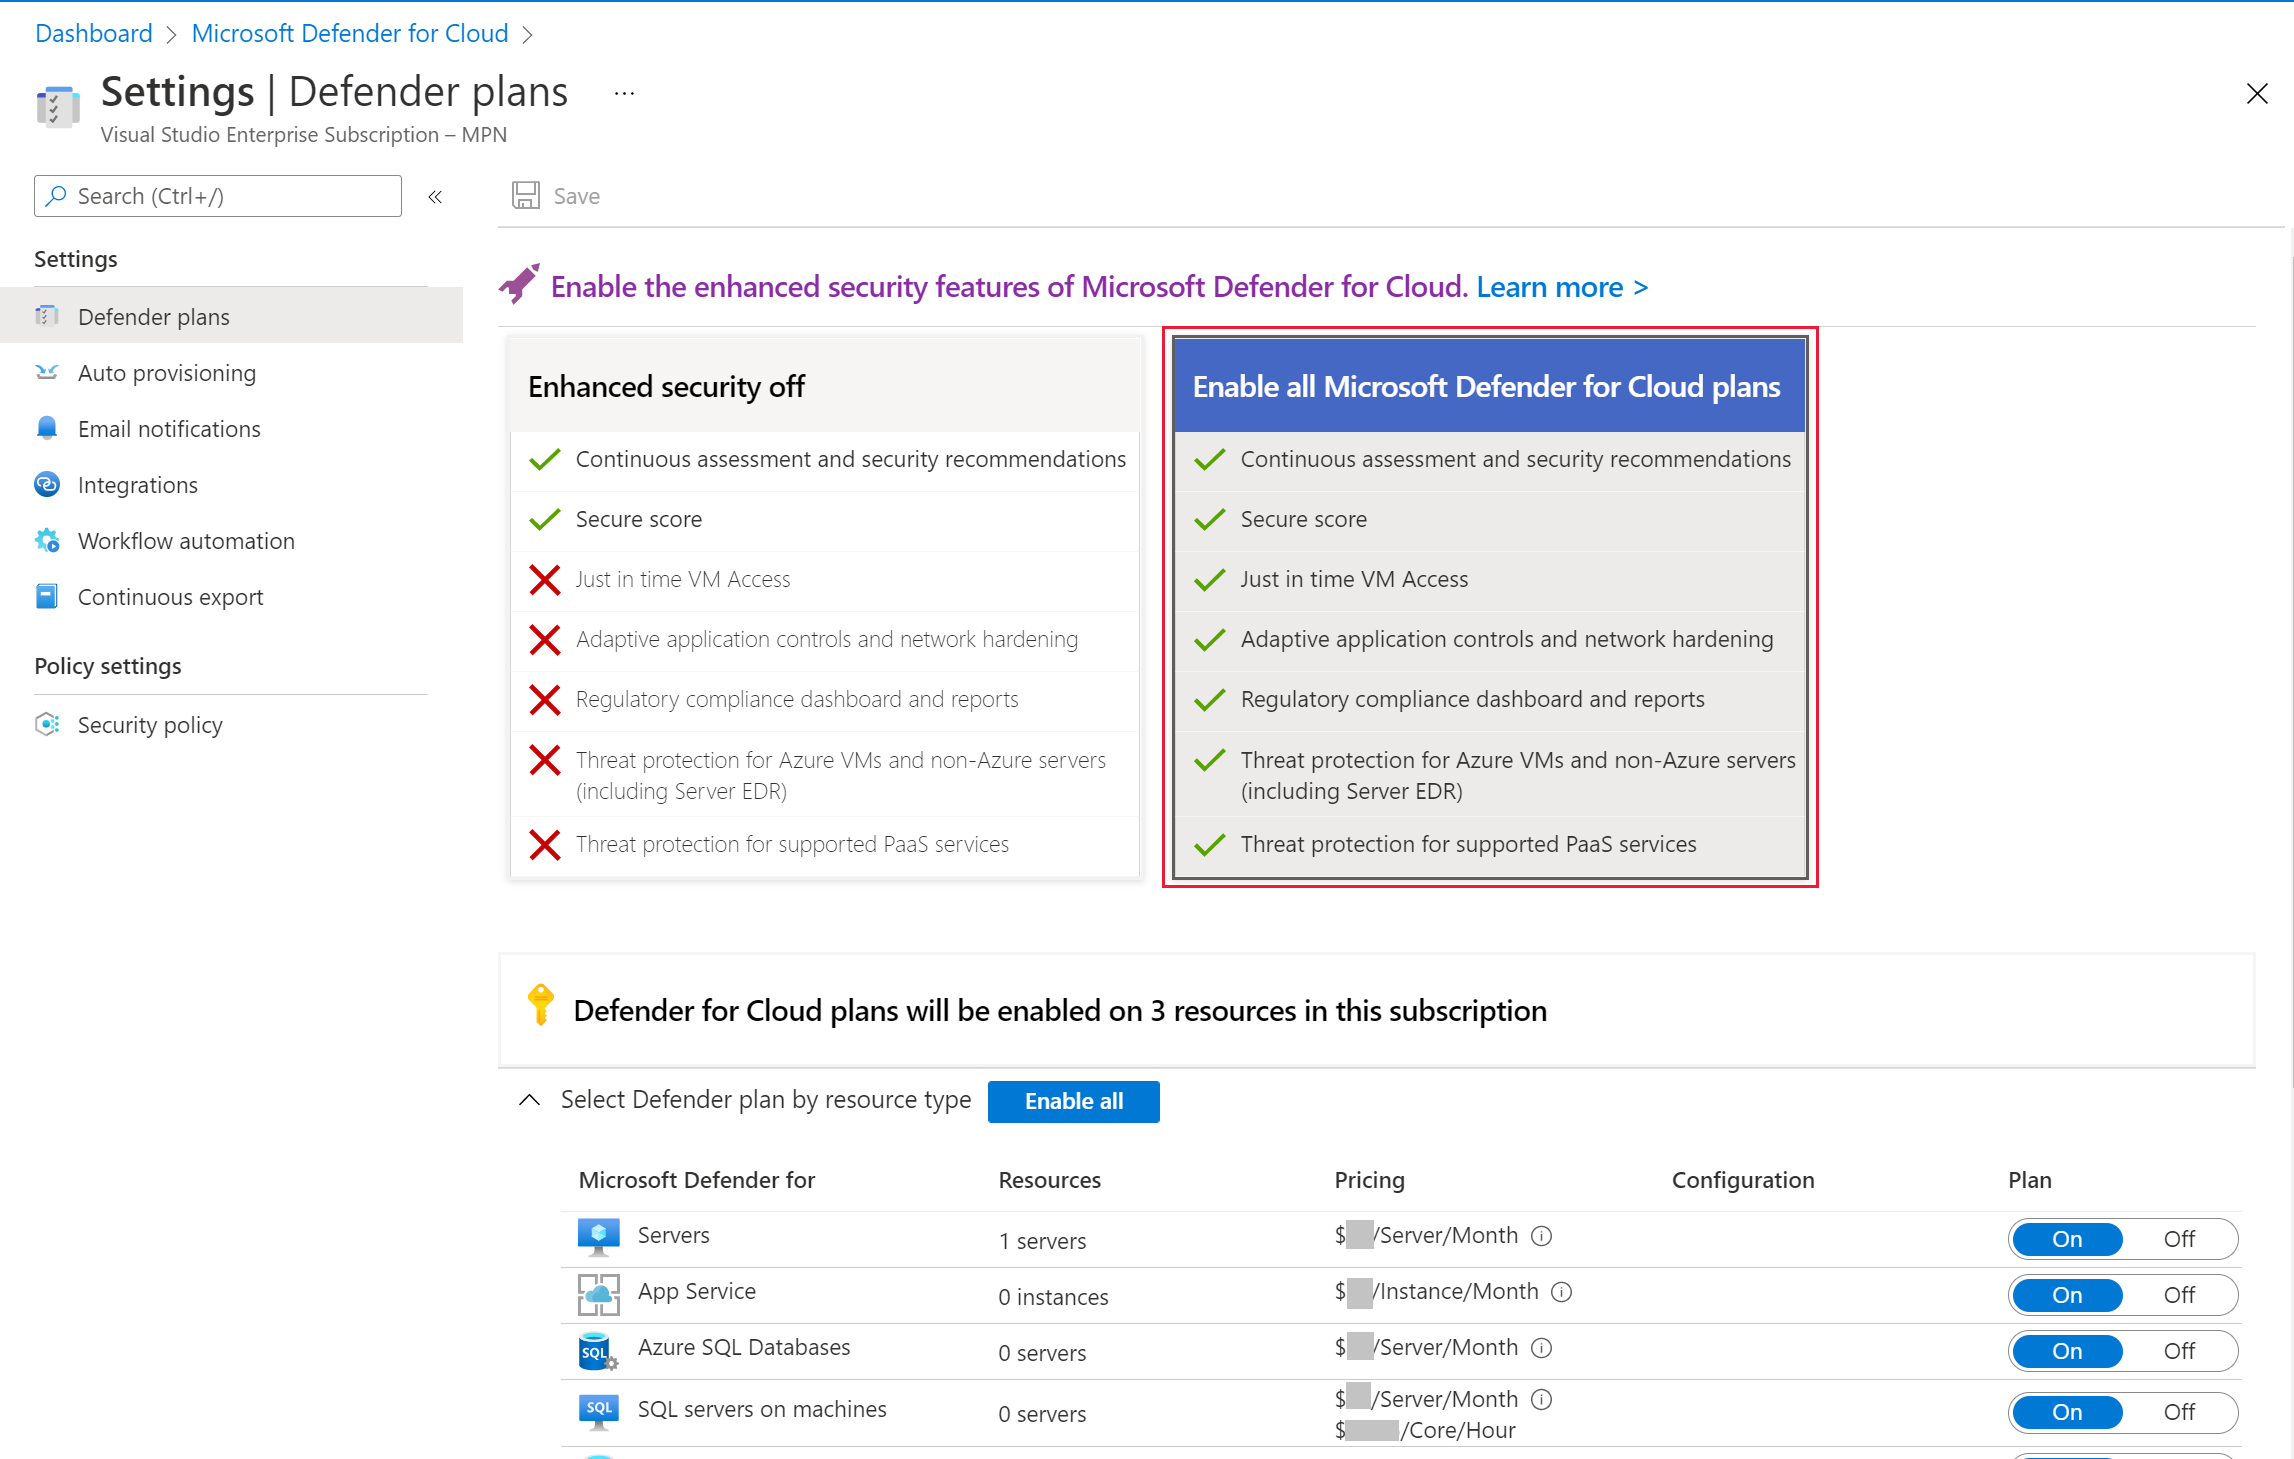 A screenshot showing how to enable all Microsoft Defender for Cloud plans.